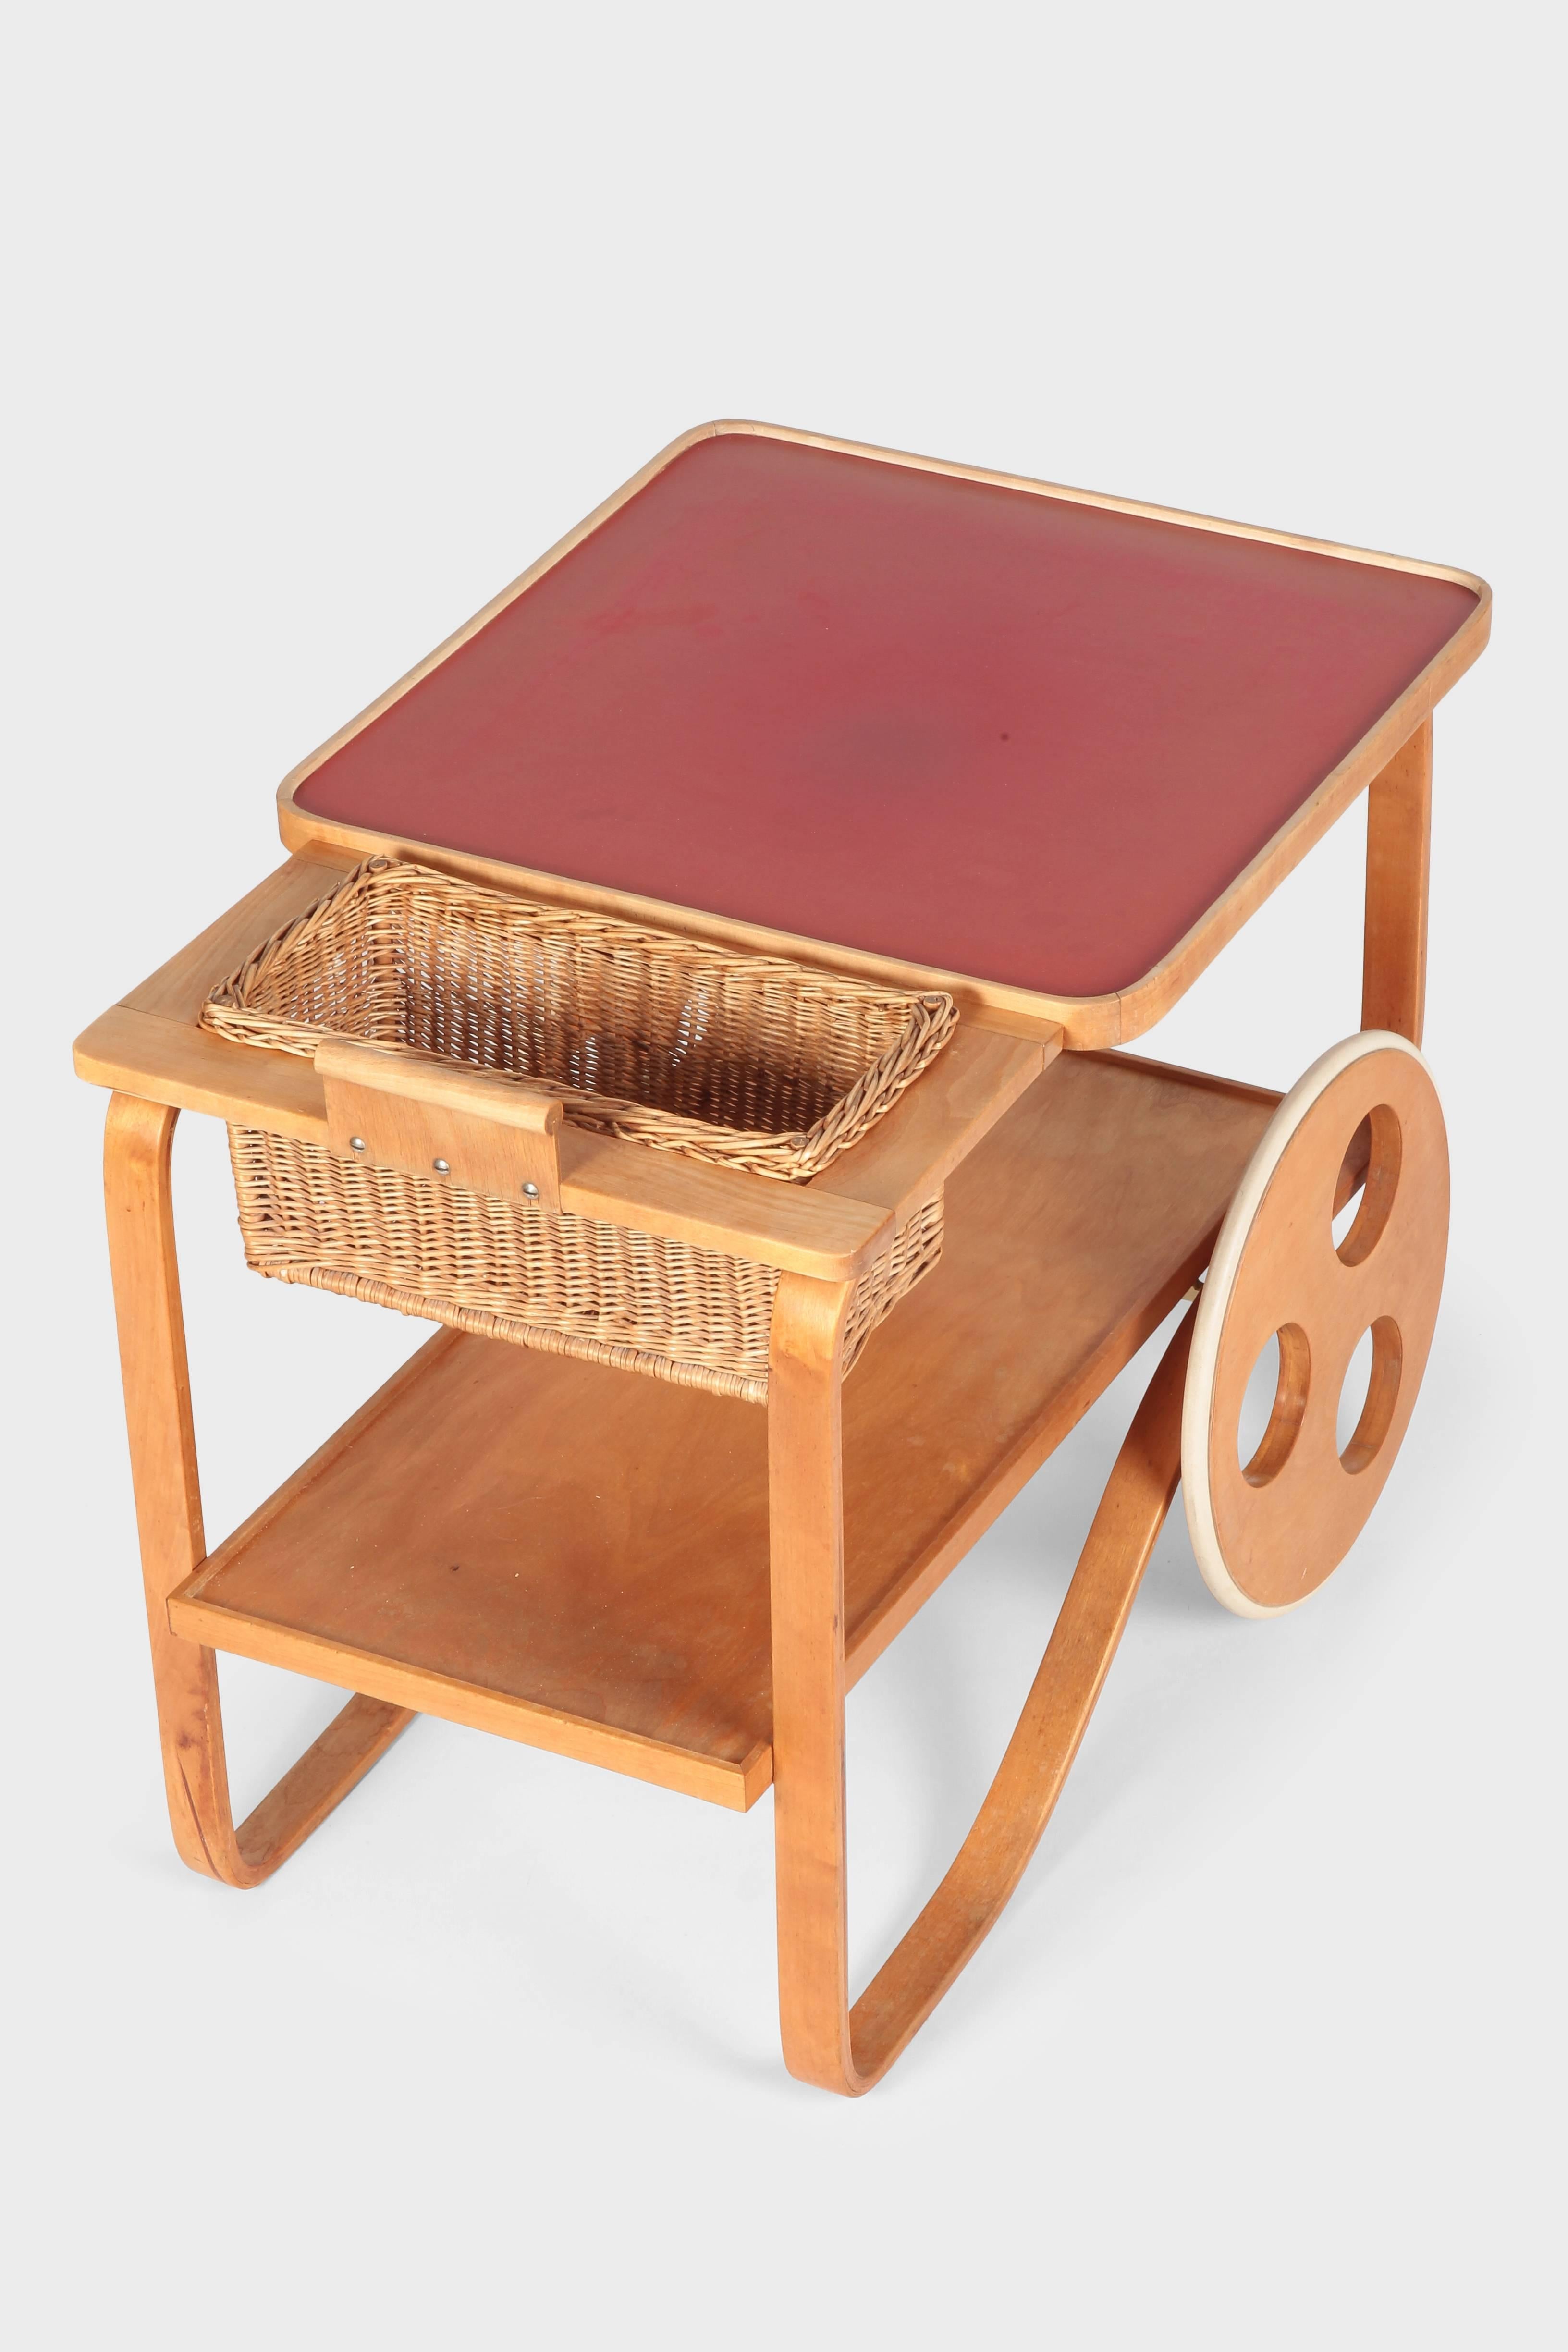 Alvar Aalto bar cart designed for Wohnbedarf in 1937. Very rare object. Molded plywood and solid birchwood, completed with a resistant, red linoleum surface and a unattached wicker basket. Gently restored, in very good condition.